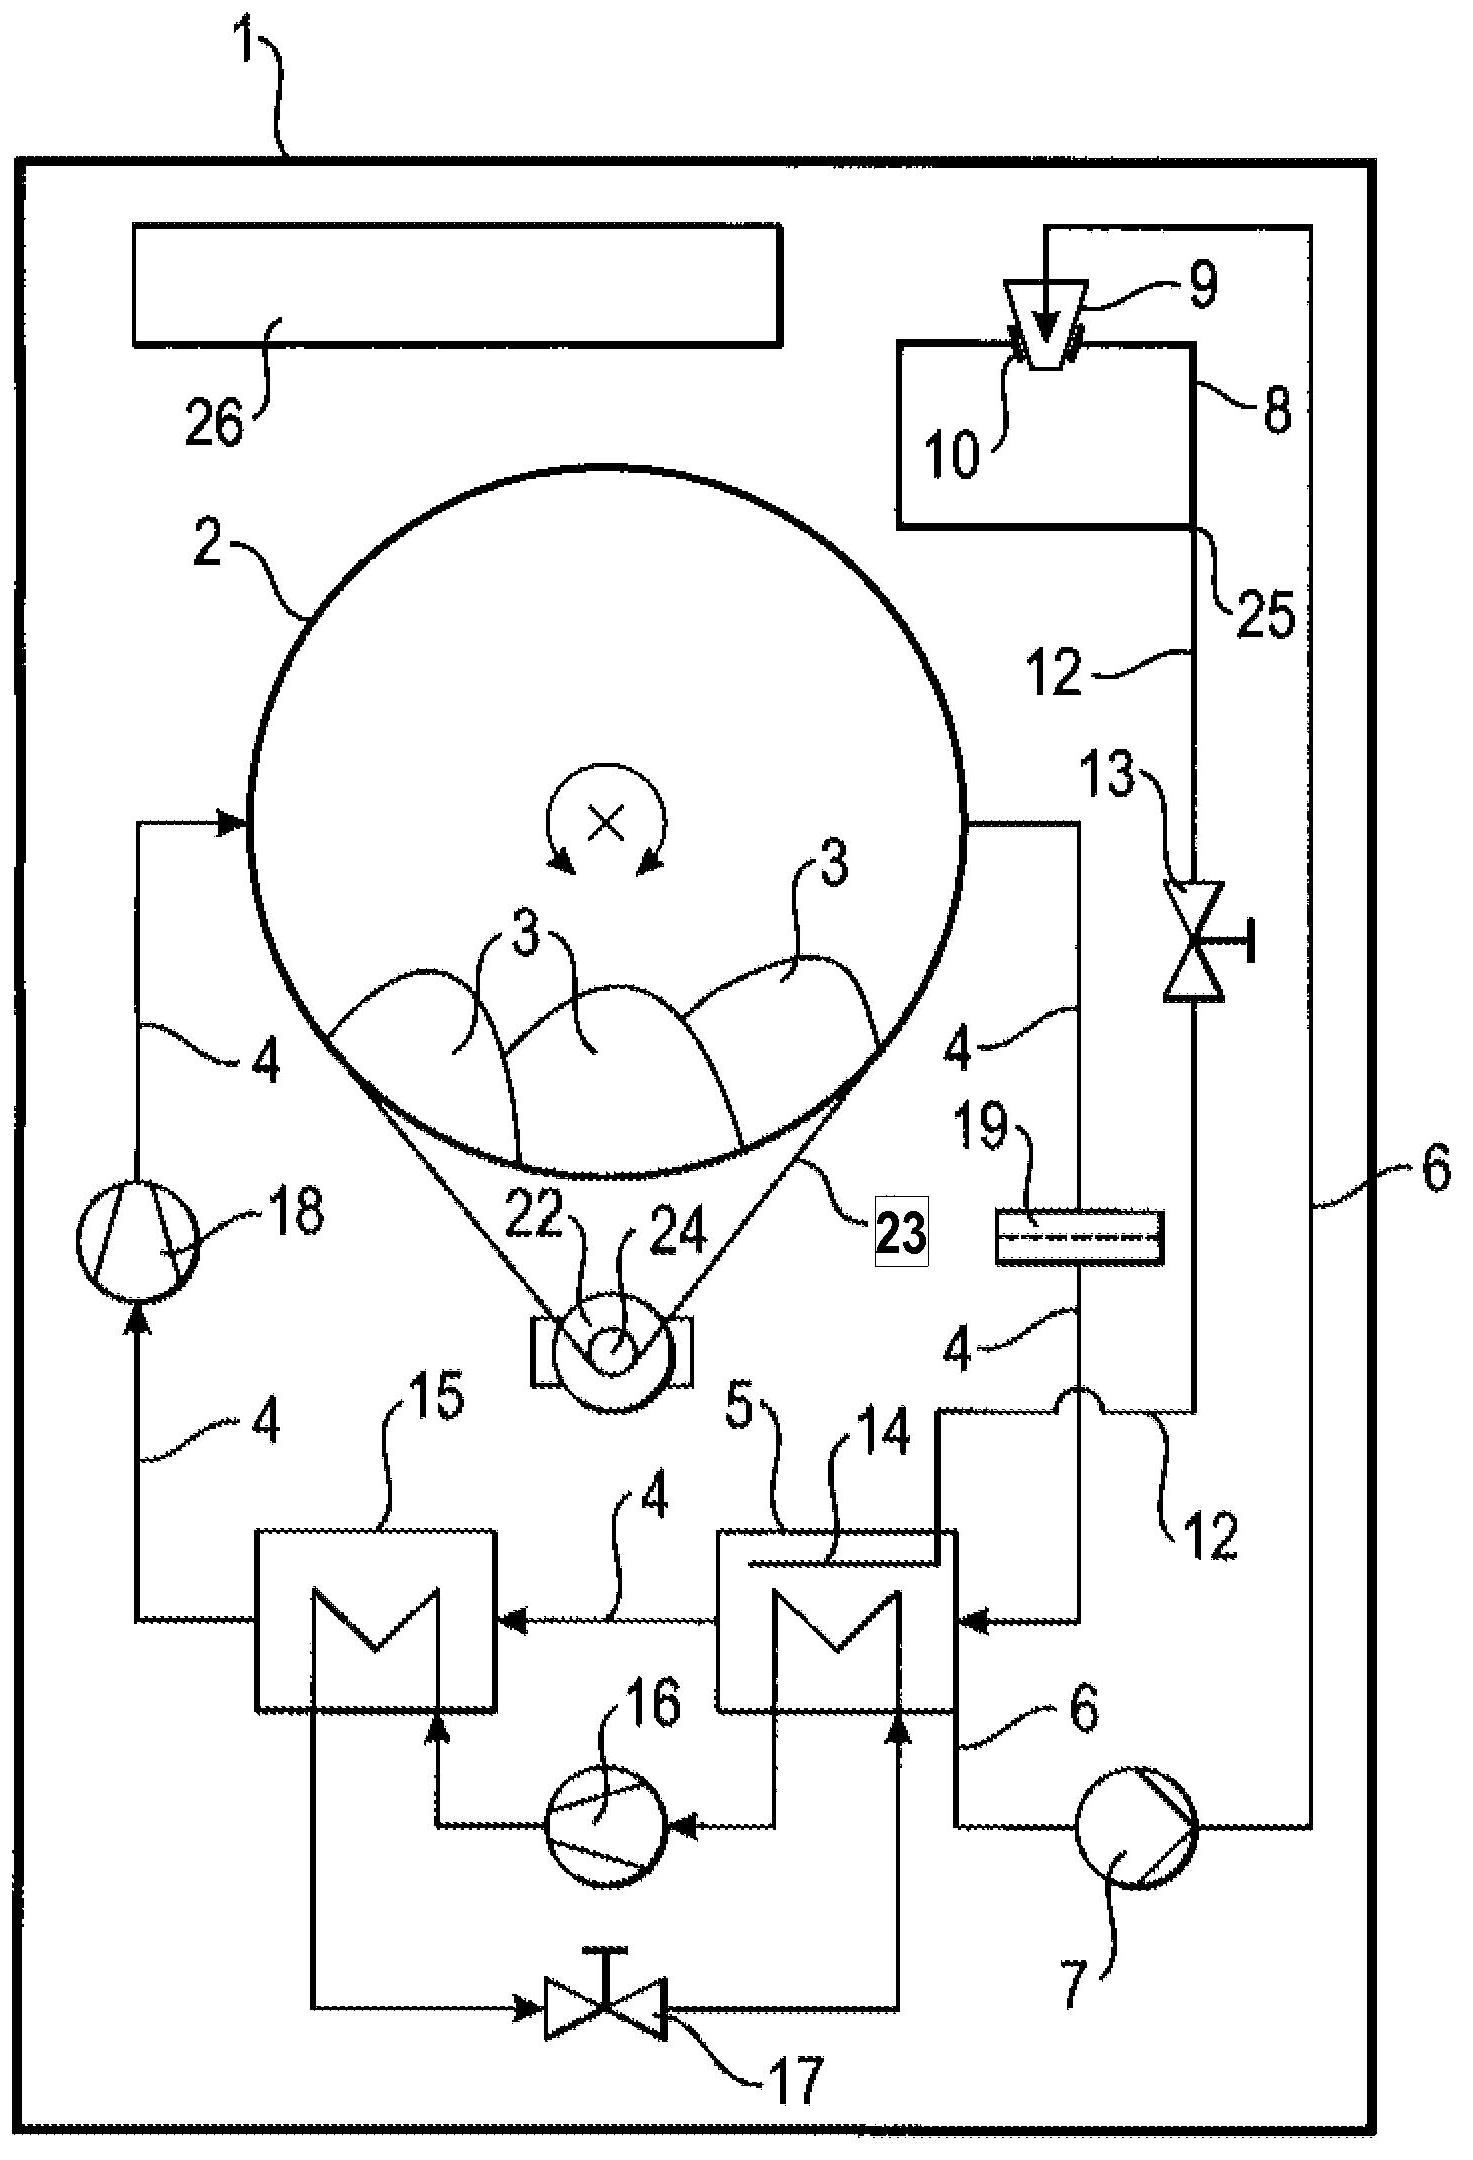 Laundry dryer having a condensate collector